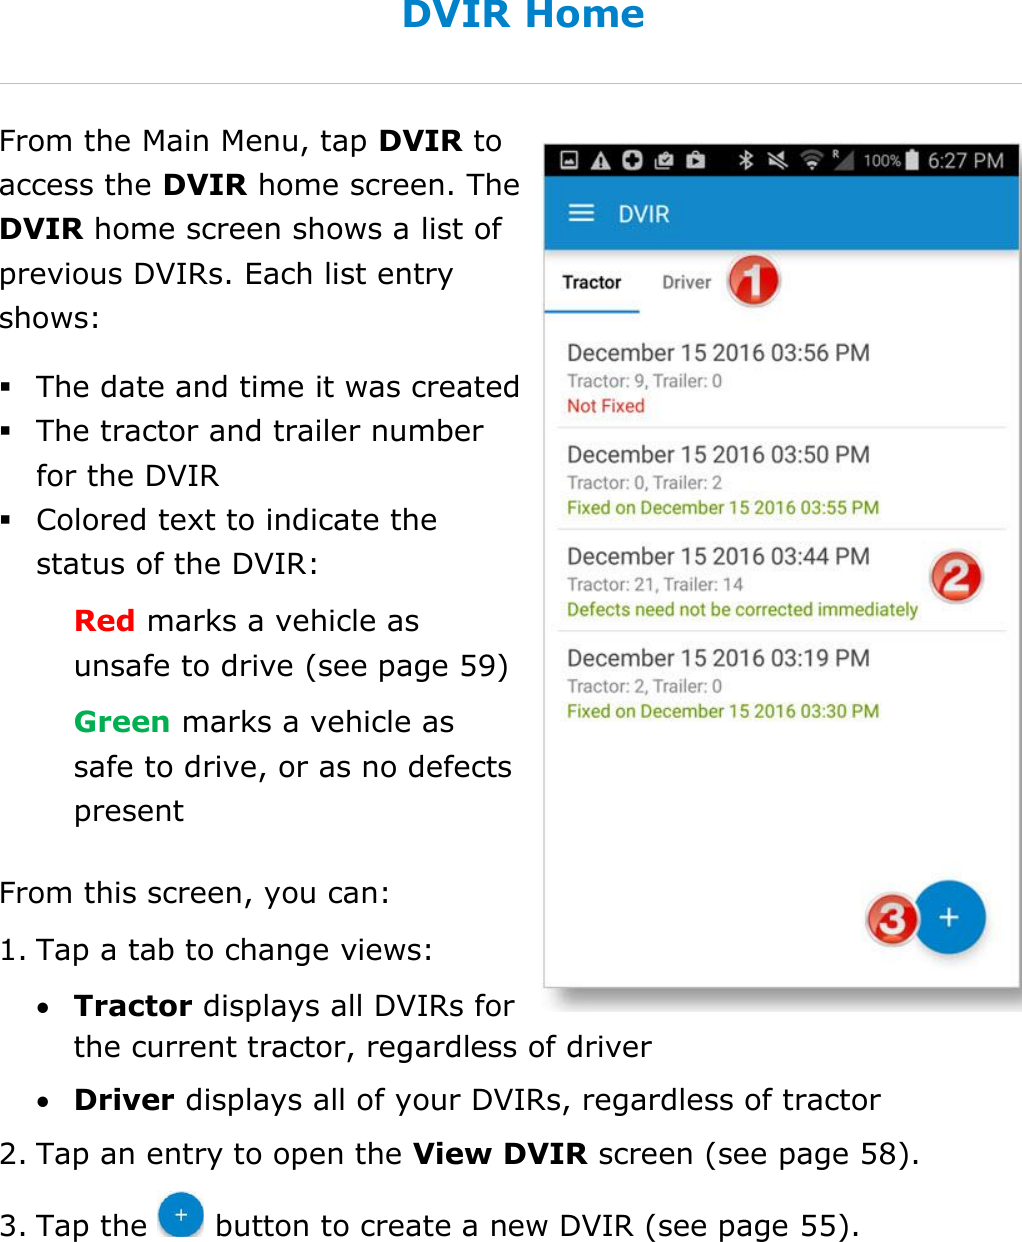 Complete a DVIR DriverConnect User Guide  54 © 2016-2017, Rand McNally, Inc. DVIR Home From the Main Menu, tap DVIR to access the DVIR home screen. The DVIR home screen shows a list of previous DVIRs. Each list entry shows:  The date and time it was created  The tractor and trailer number for the DVIR  Colored text to indicate the status of the DVIR: Red marks a vehicle as unsafe to drive (see page 59) Green marks a vehicle as safe to drive, or as no defects present  From this screen, you can: 1. Tap a tab to change views:  Tractor displays all DVIRs for the current tractor, regardless of driver  Driver displays all of your DVIRs, regardless of tractor 2. Tap an entry to open the View DVIR screen (see page 58).  3. Tap the   button to create a new DVIR (see page 55).    